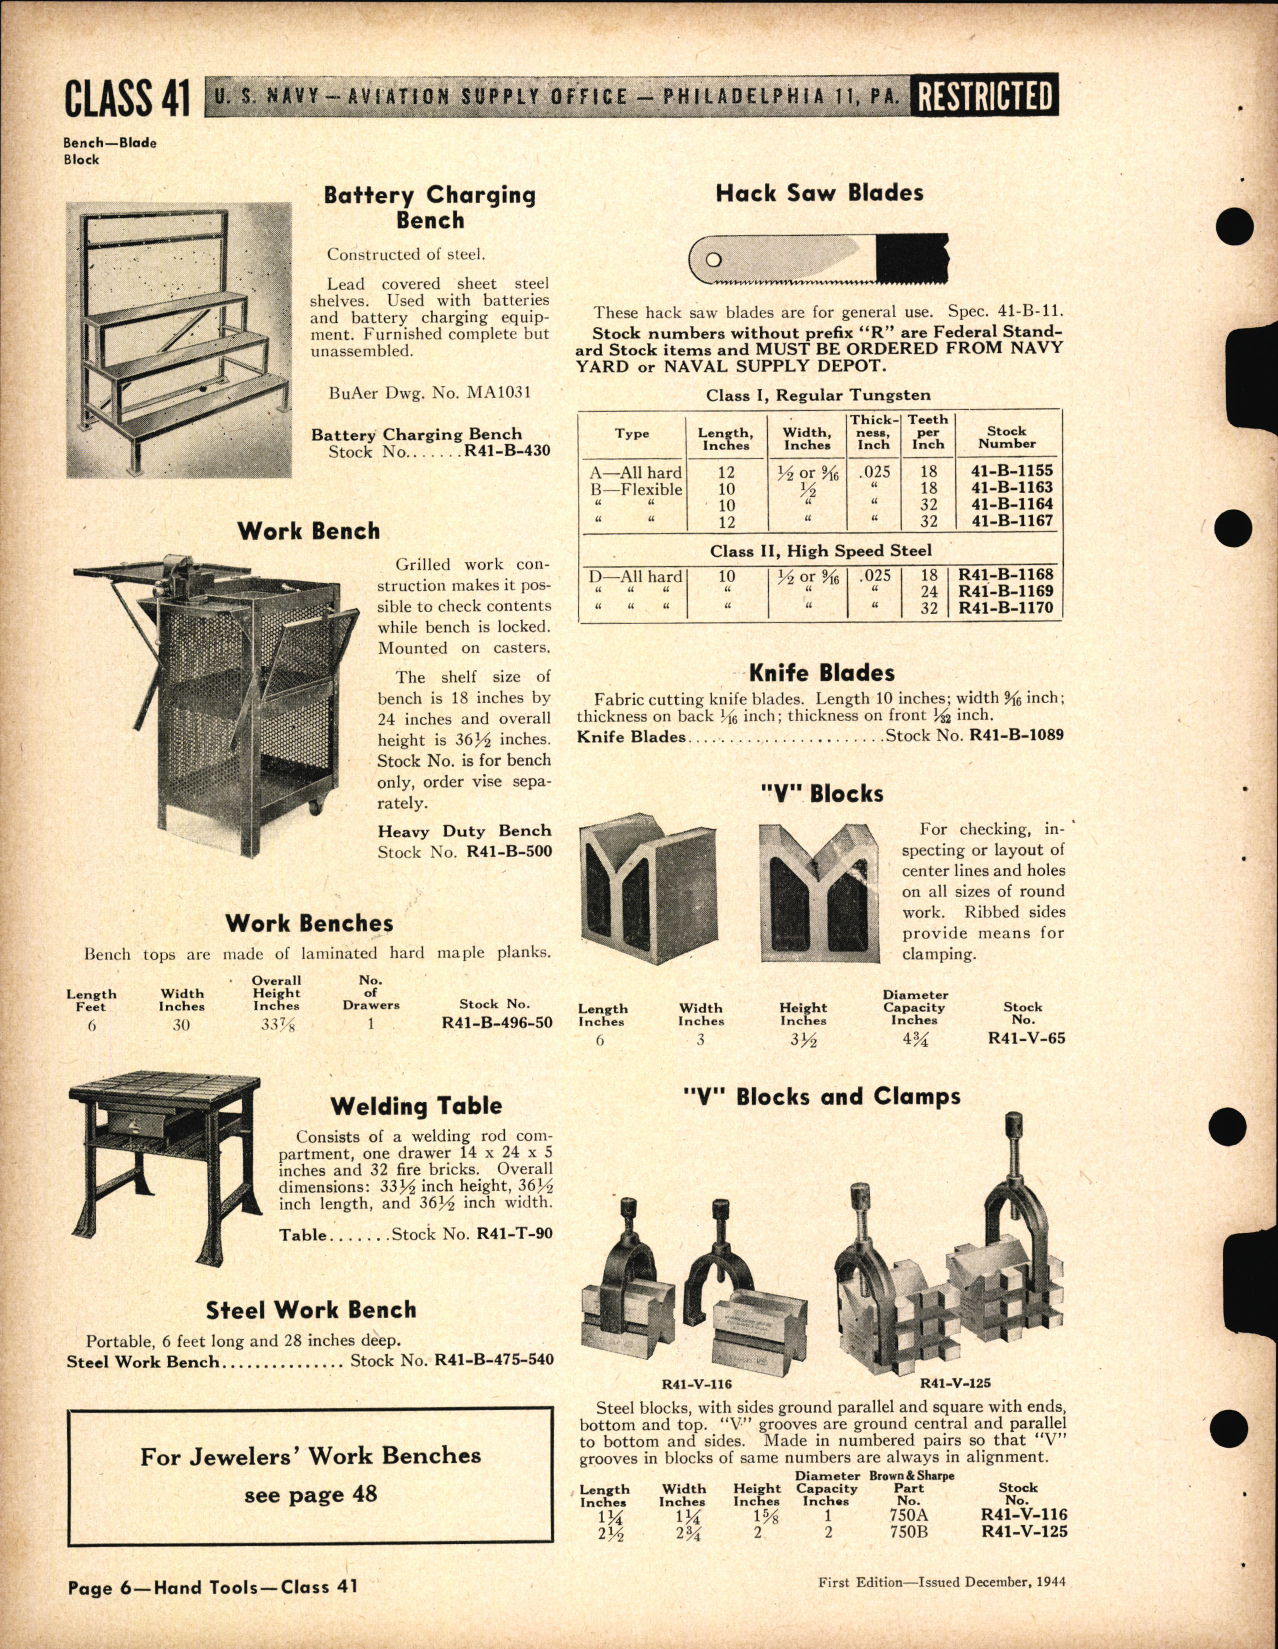 Sample page 6 from AirCorps Library document: Hand Tools